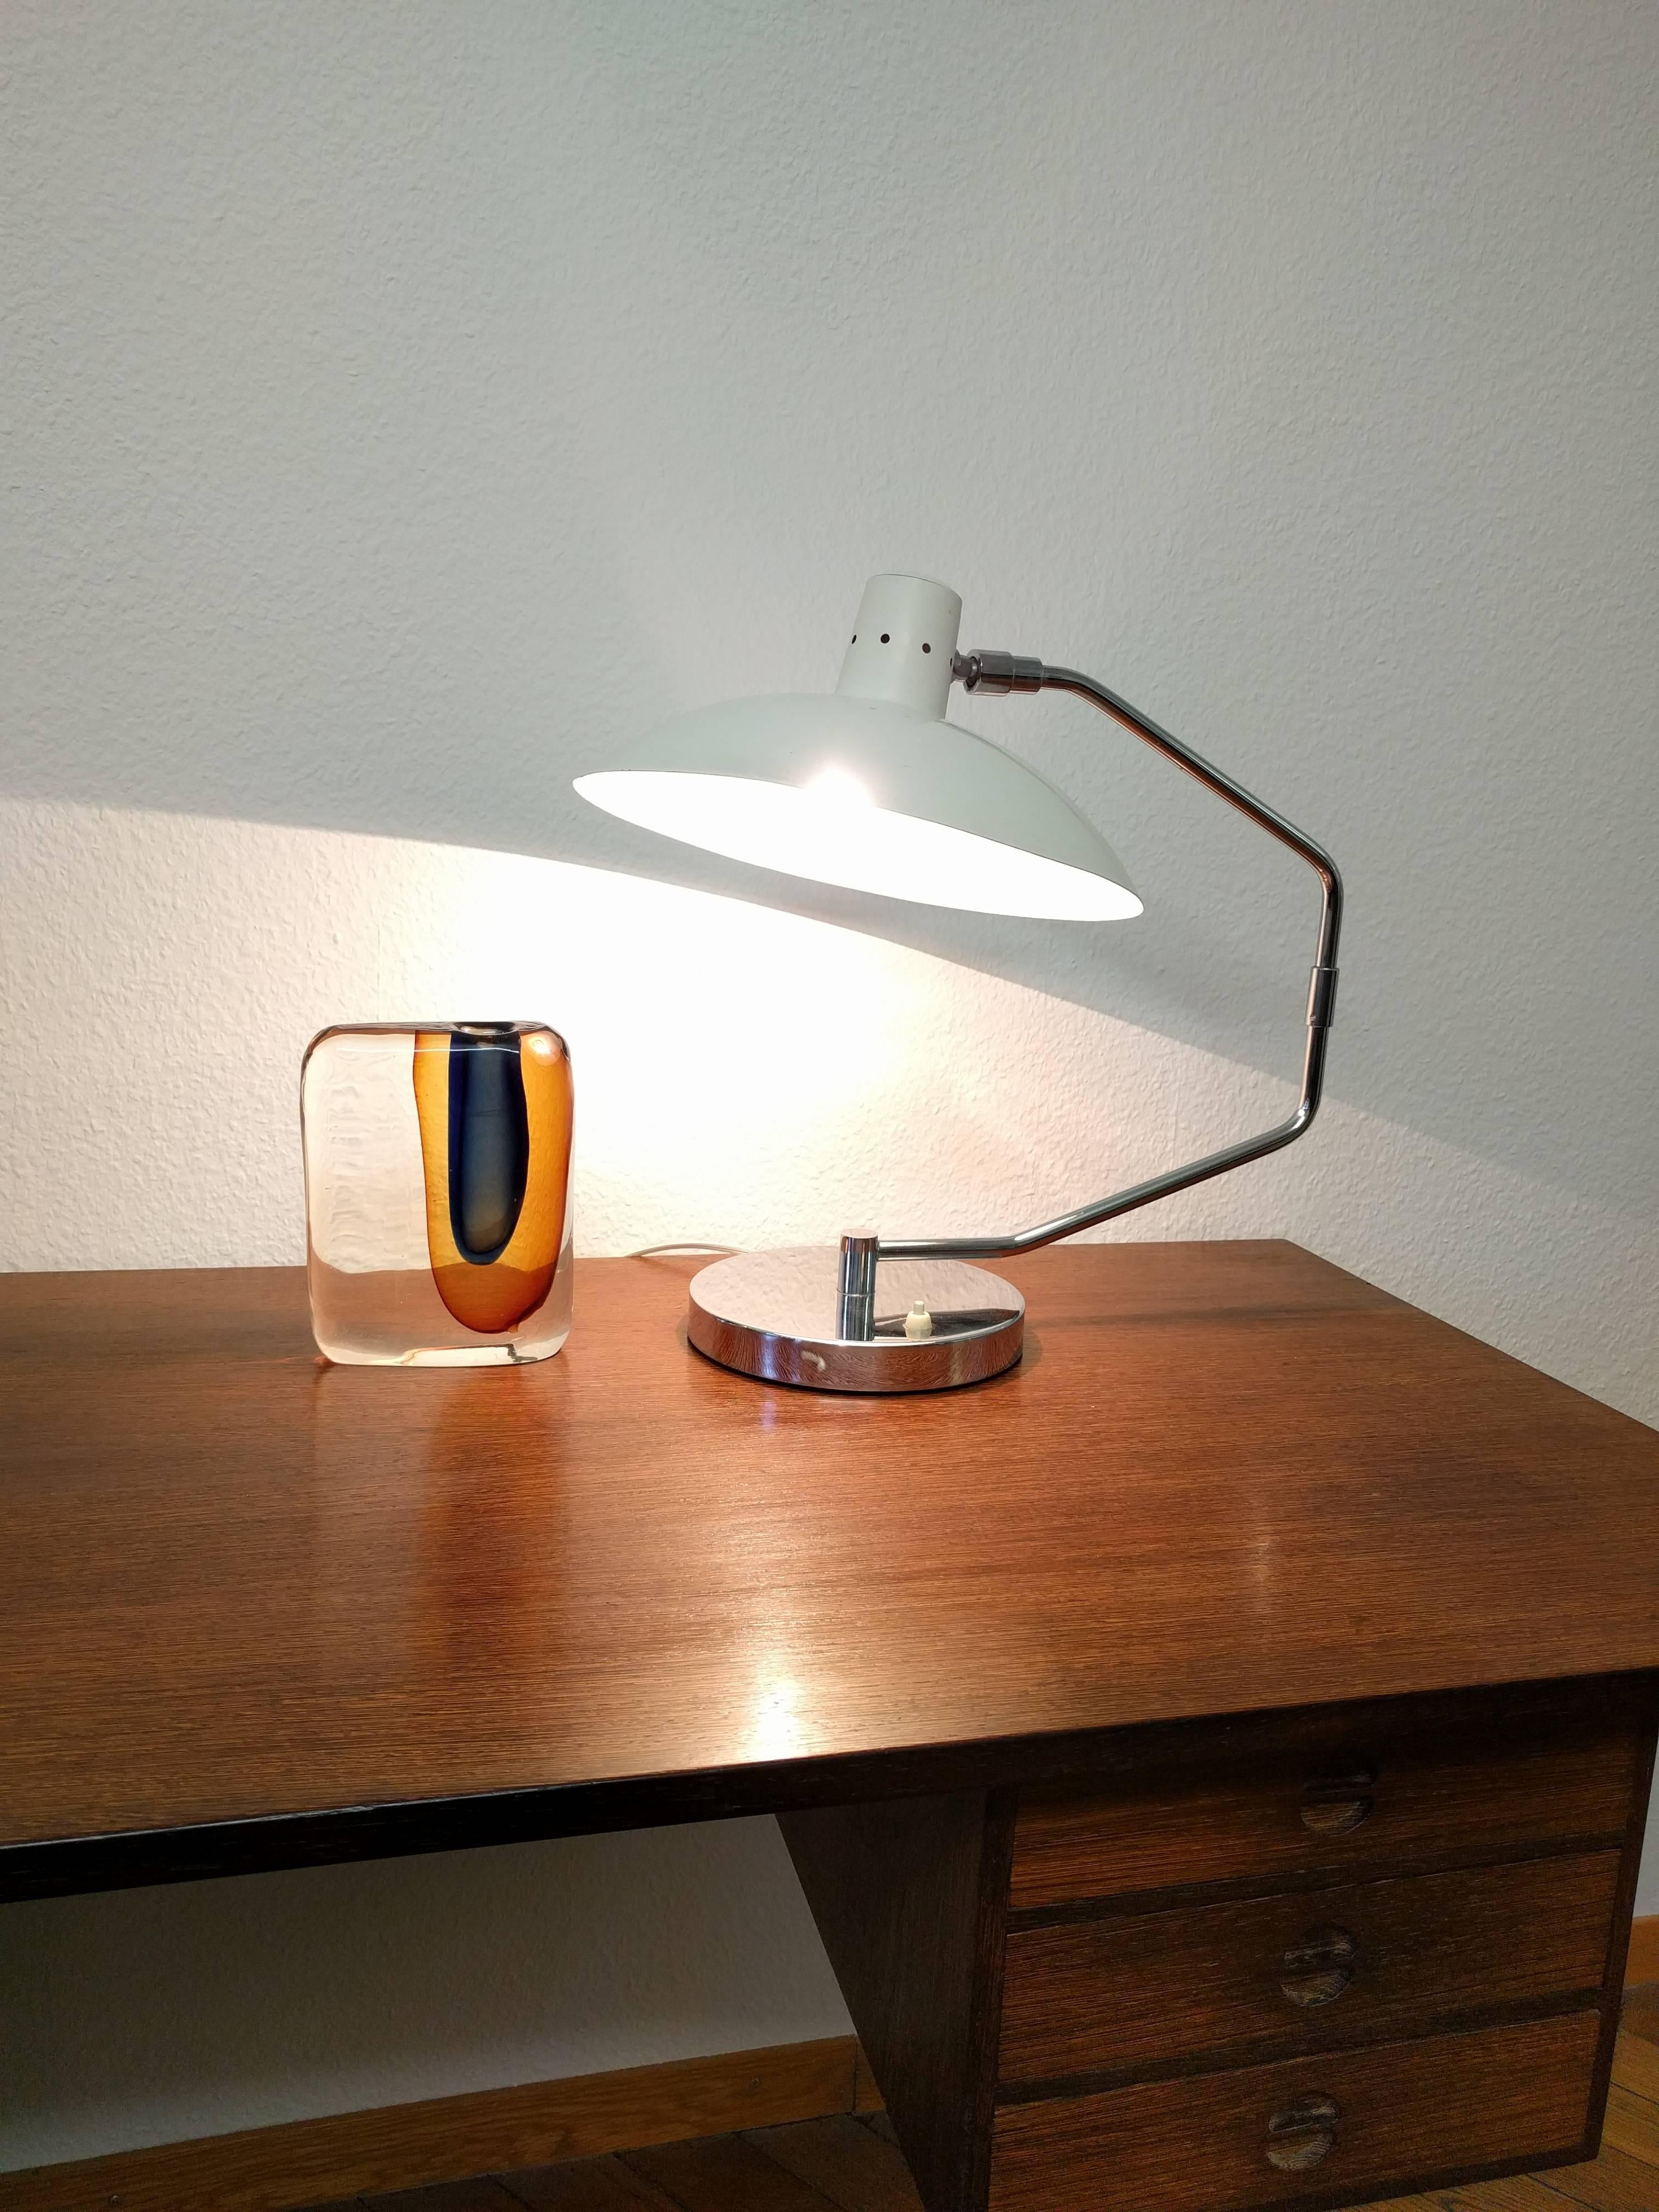 1960s Clay Michie desk lamp No. 8 for Knoll International.
Tilting white shade on swivel arm.
Very good condition.
 